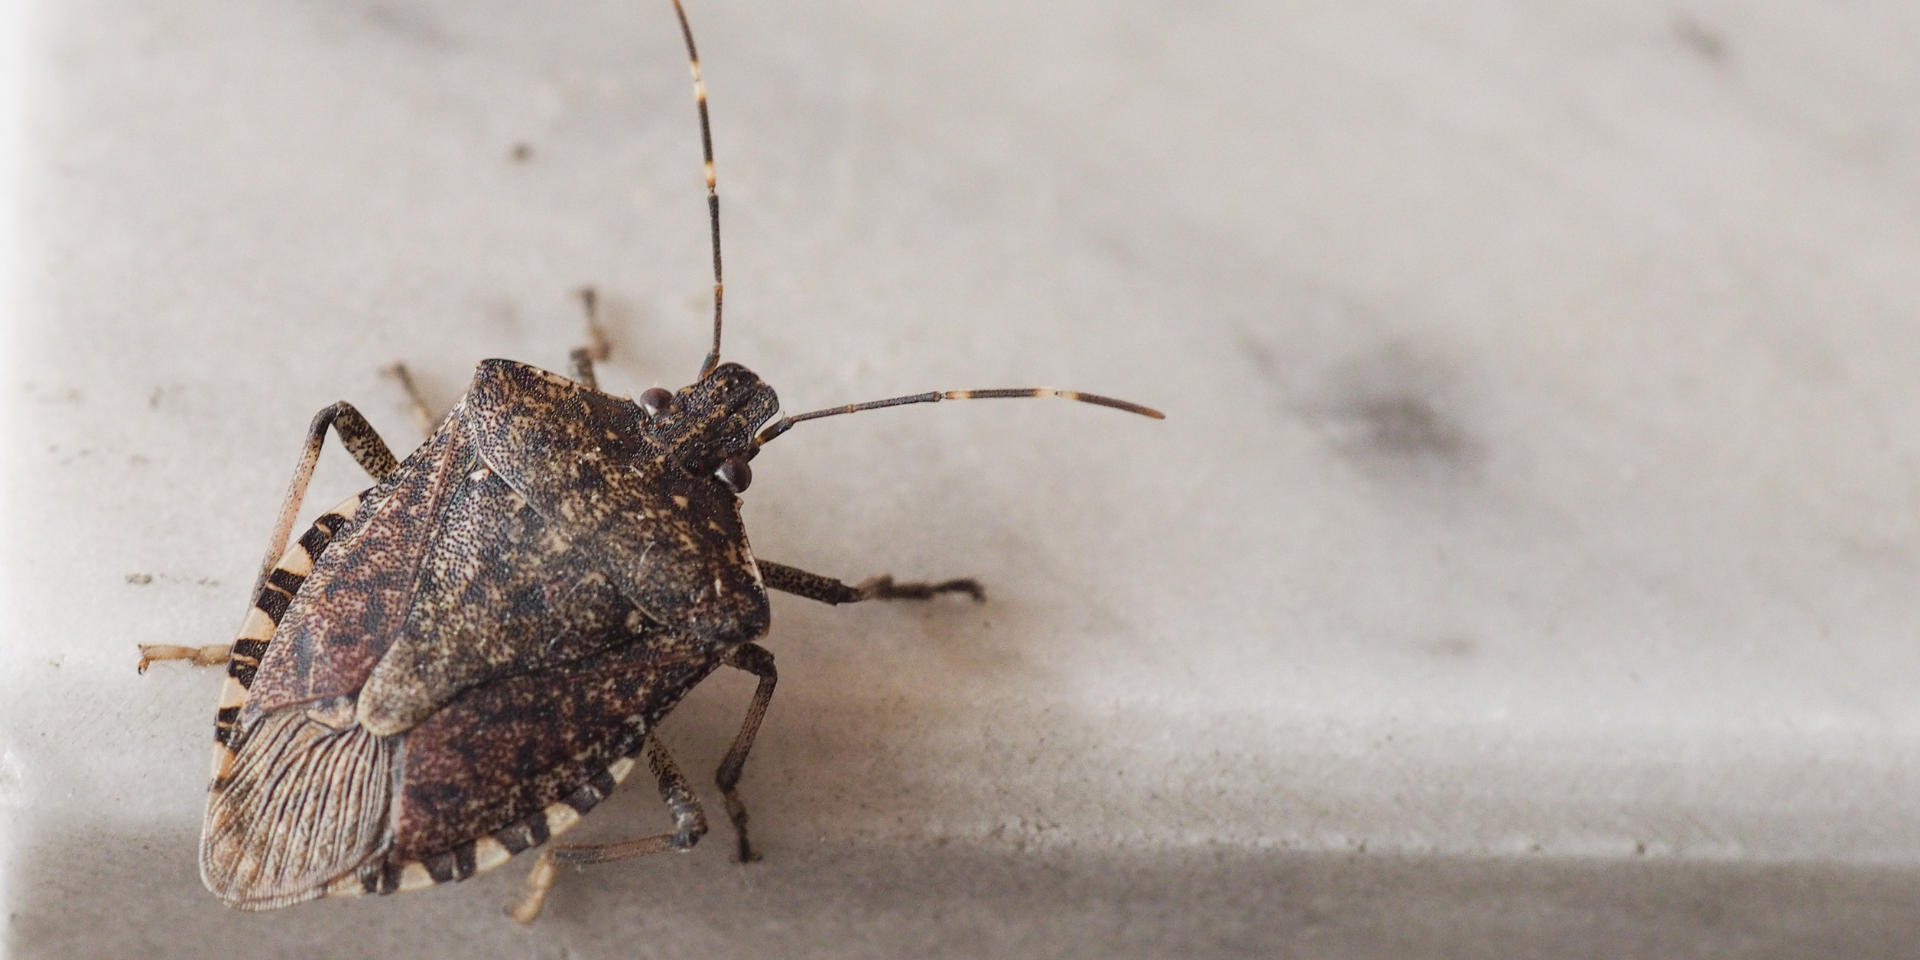 stink bugs enter residential homes is in search of warmth.